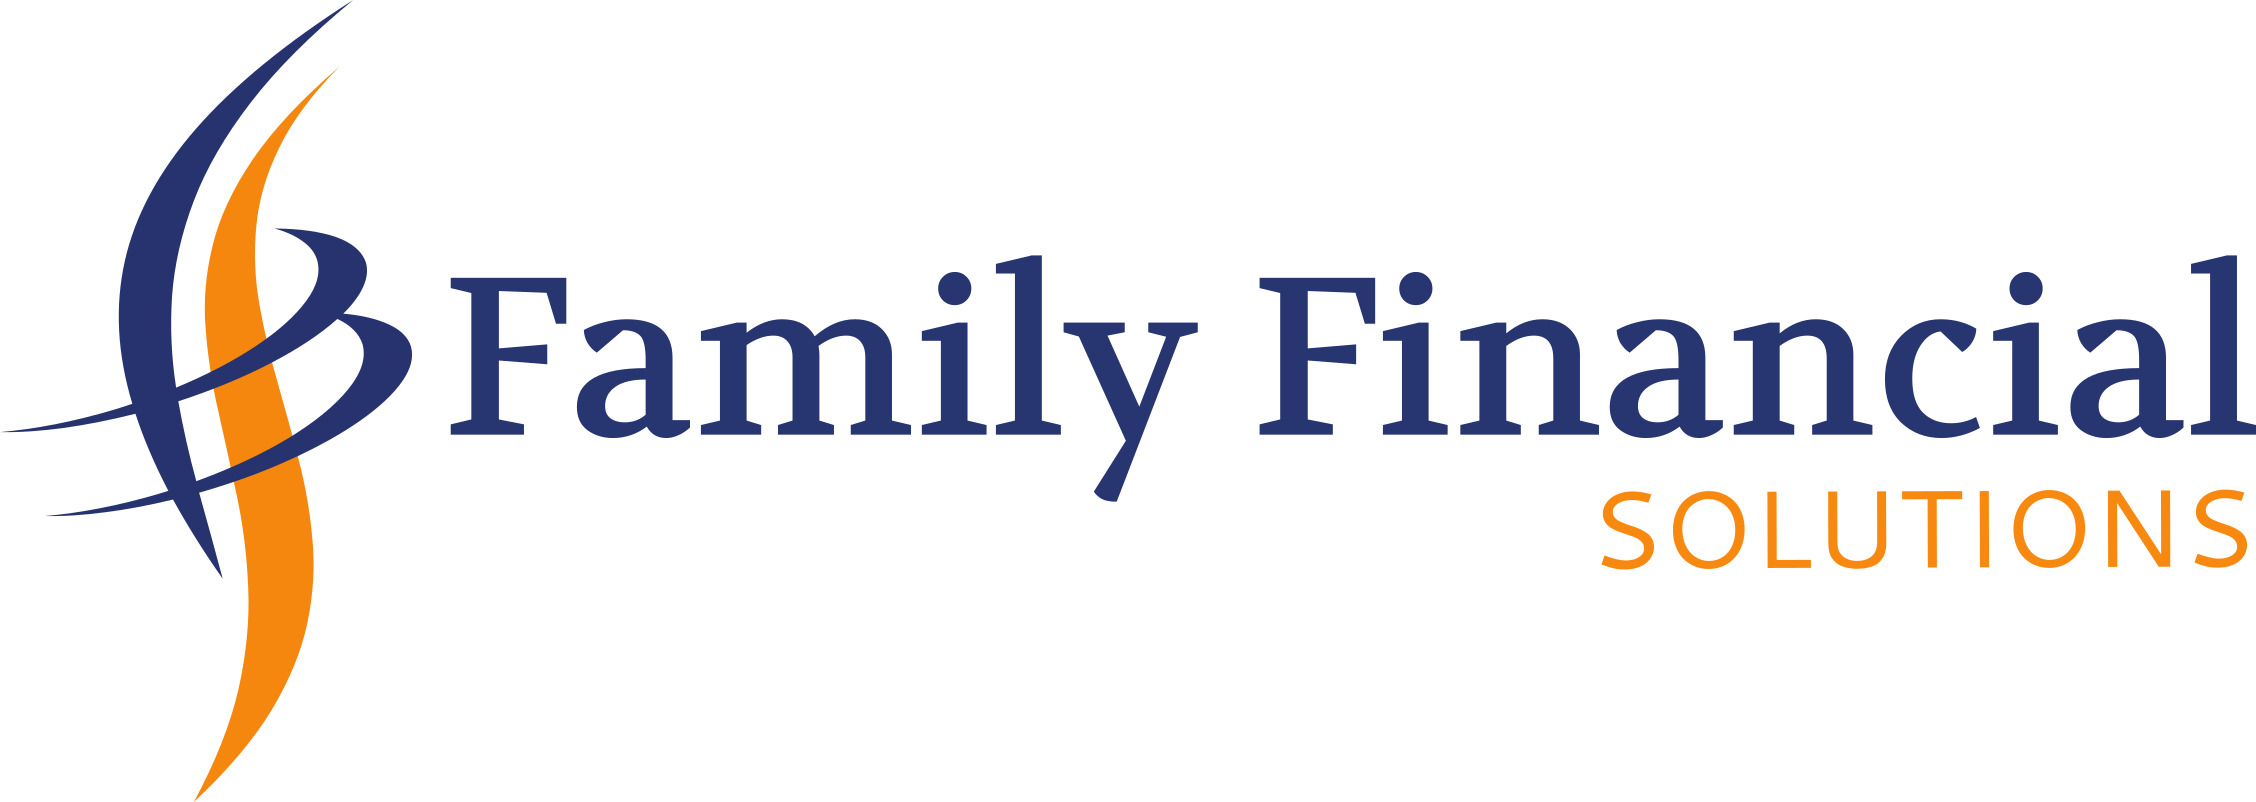 Family Financial Solutions